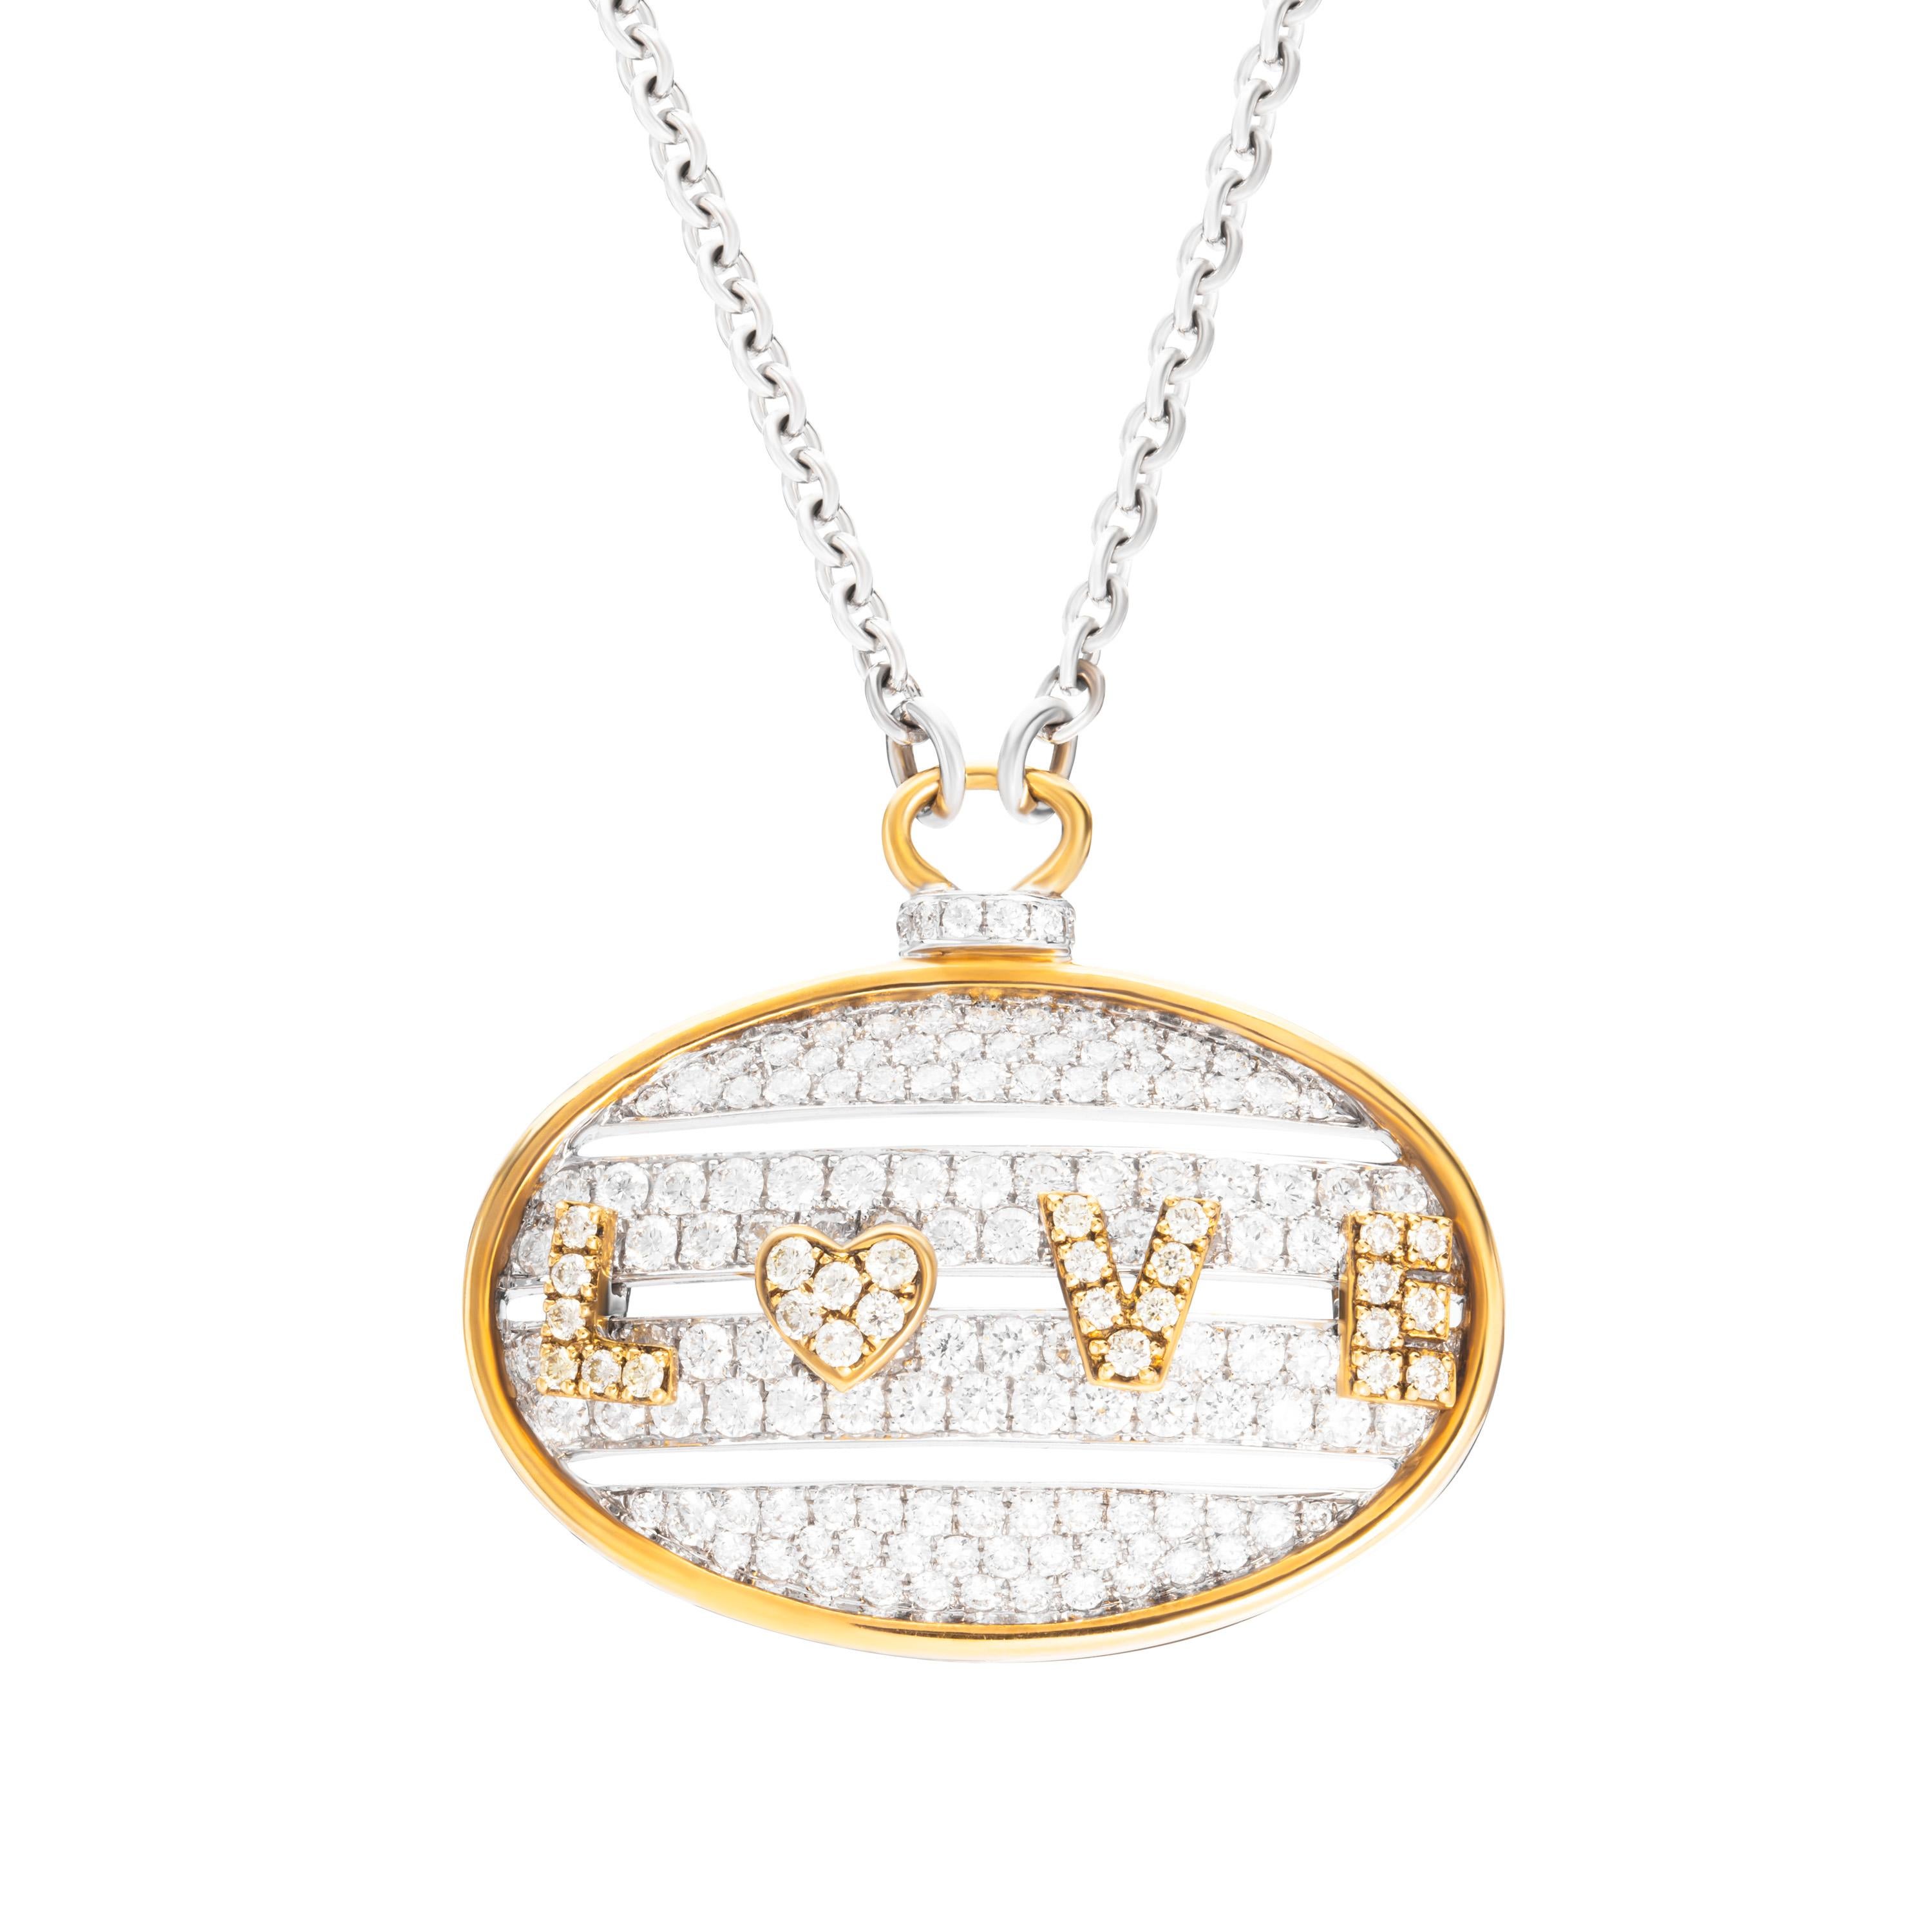 Crafted from two-tone 18-karat white and yellow gold, this unique medallion pendant features 2.28 carats of sparkling white diamonds and 0.34 carats of radiant yellow diamonds that spell and slide 